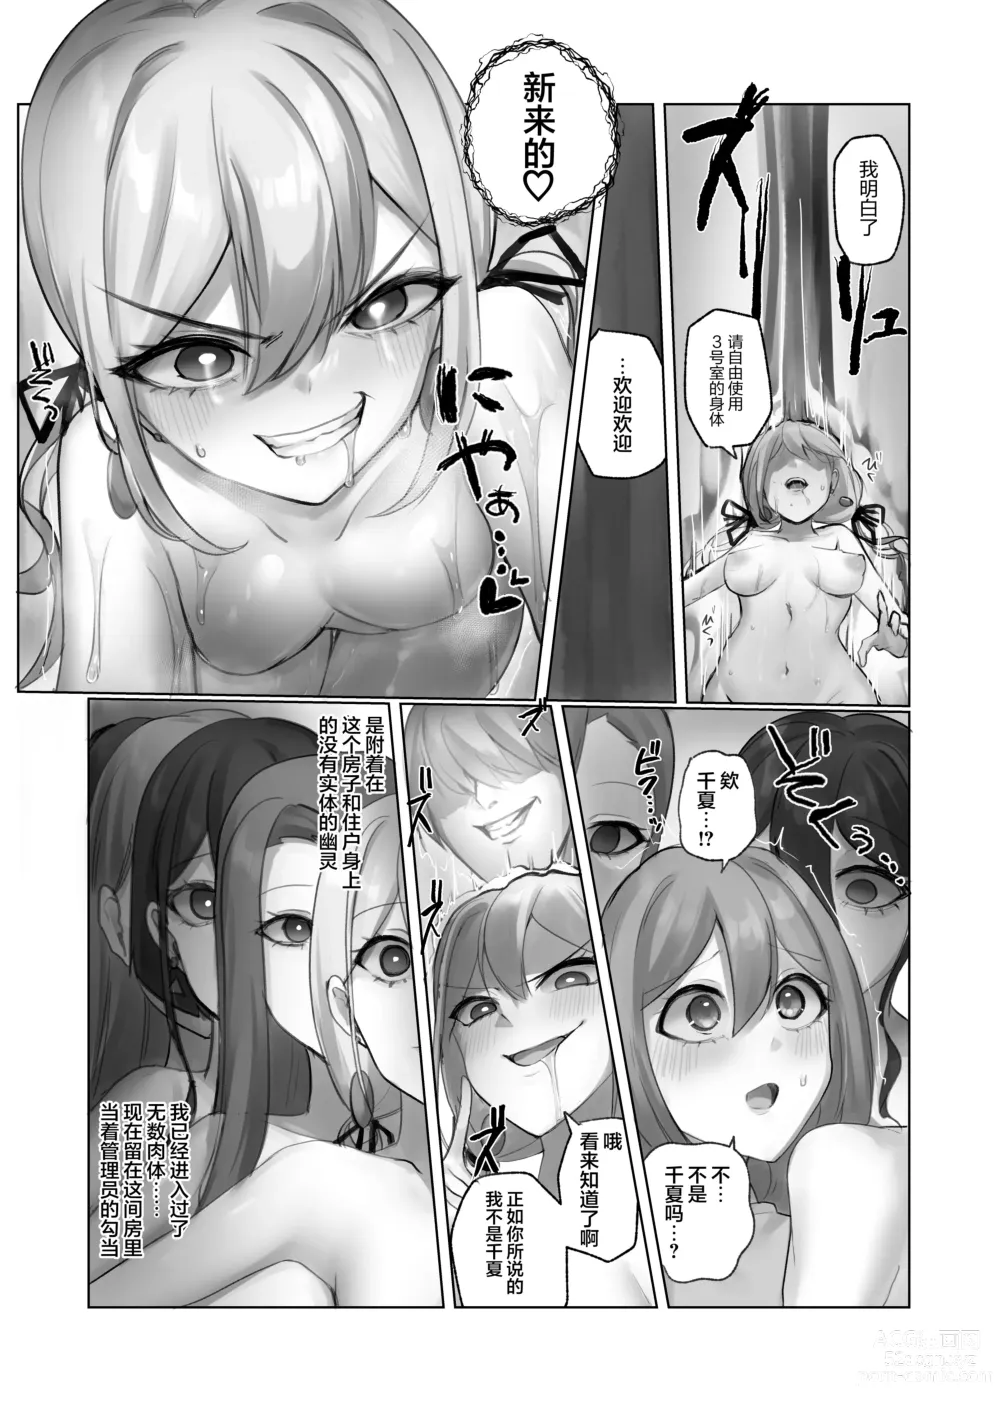 Page 9 of doujinshi Youkoso  Share House e